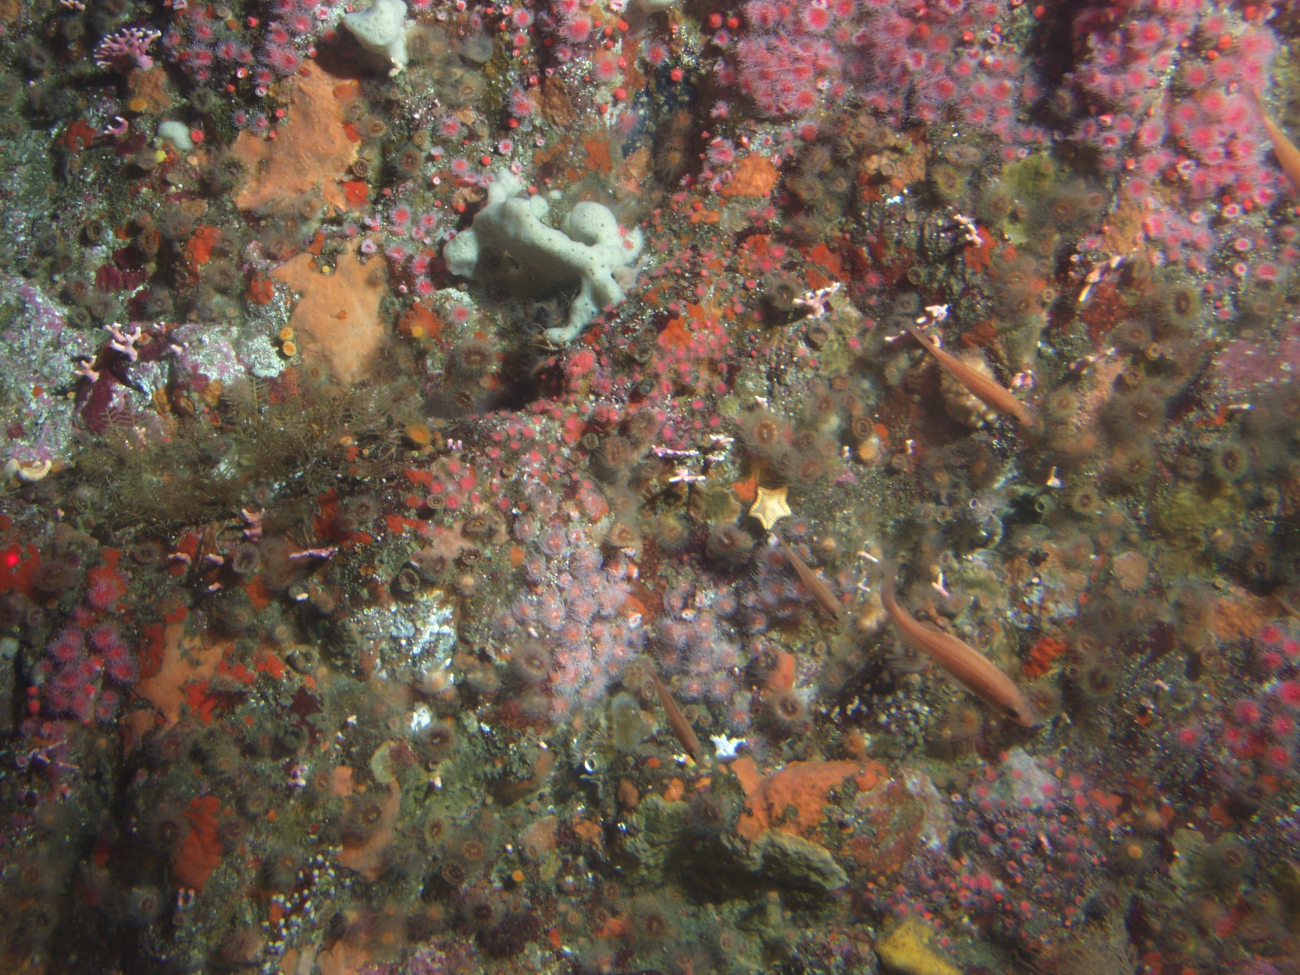 Foliose and crustose sponges, strawberry anemones, orange cup coralsand other invertebrates cover the upper rocky reef habitatat 50 meters